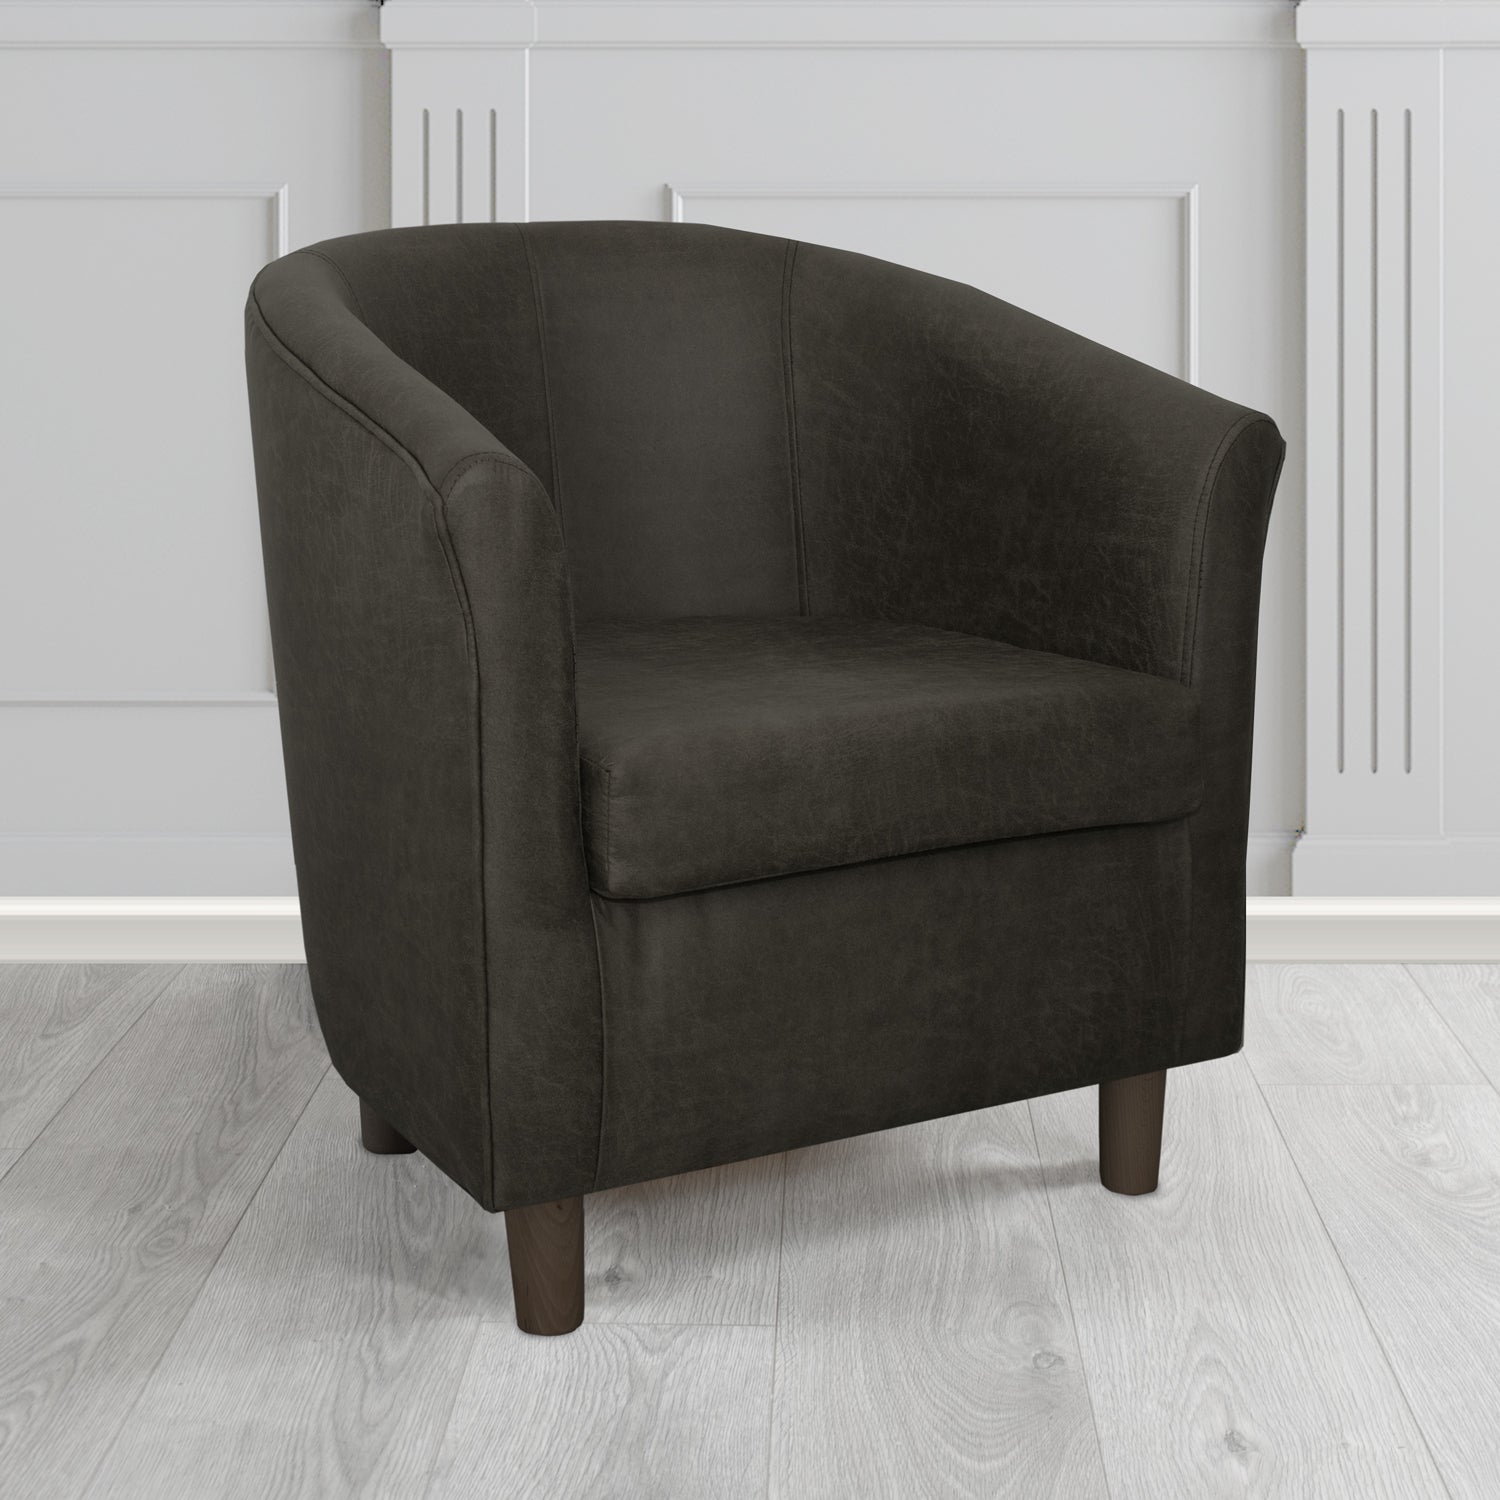 Tuscany Rhodeo Black Faux Leather Tub Chair